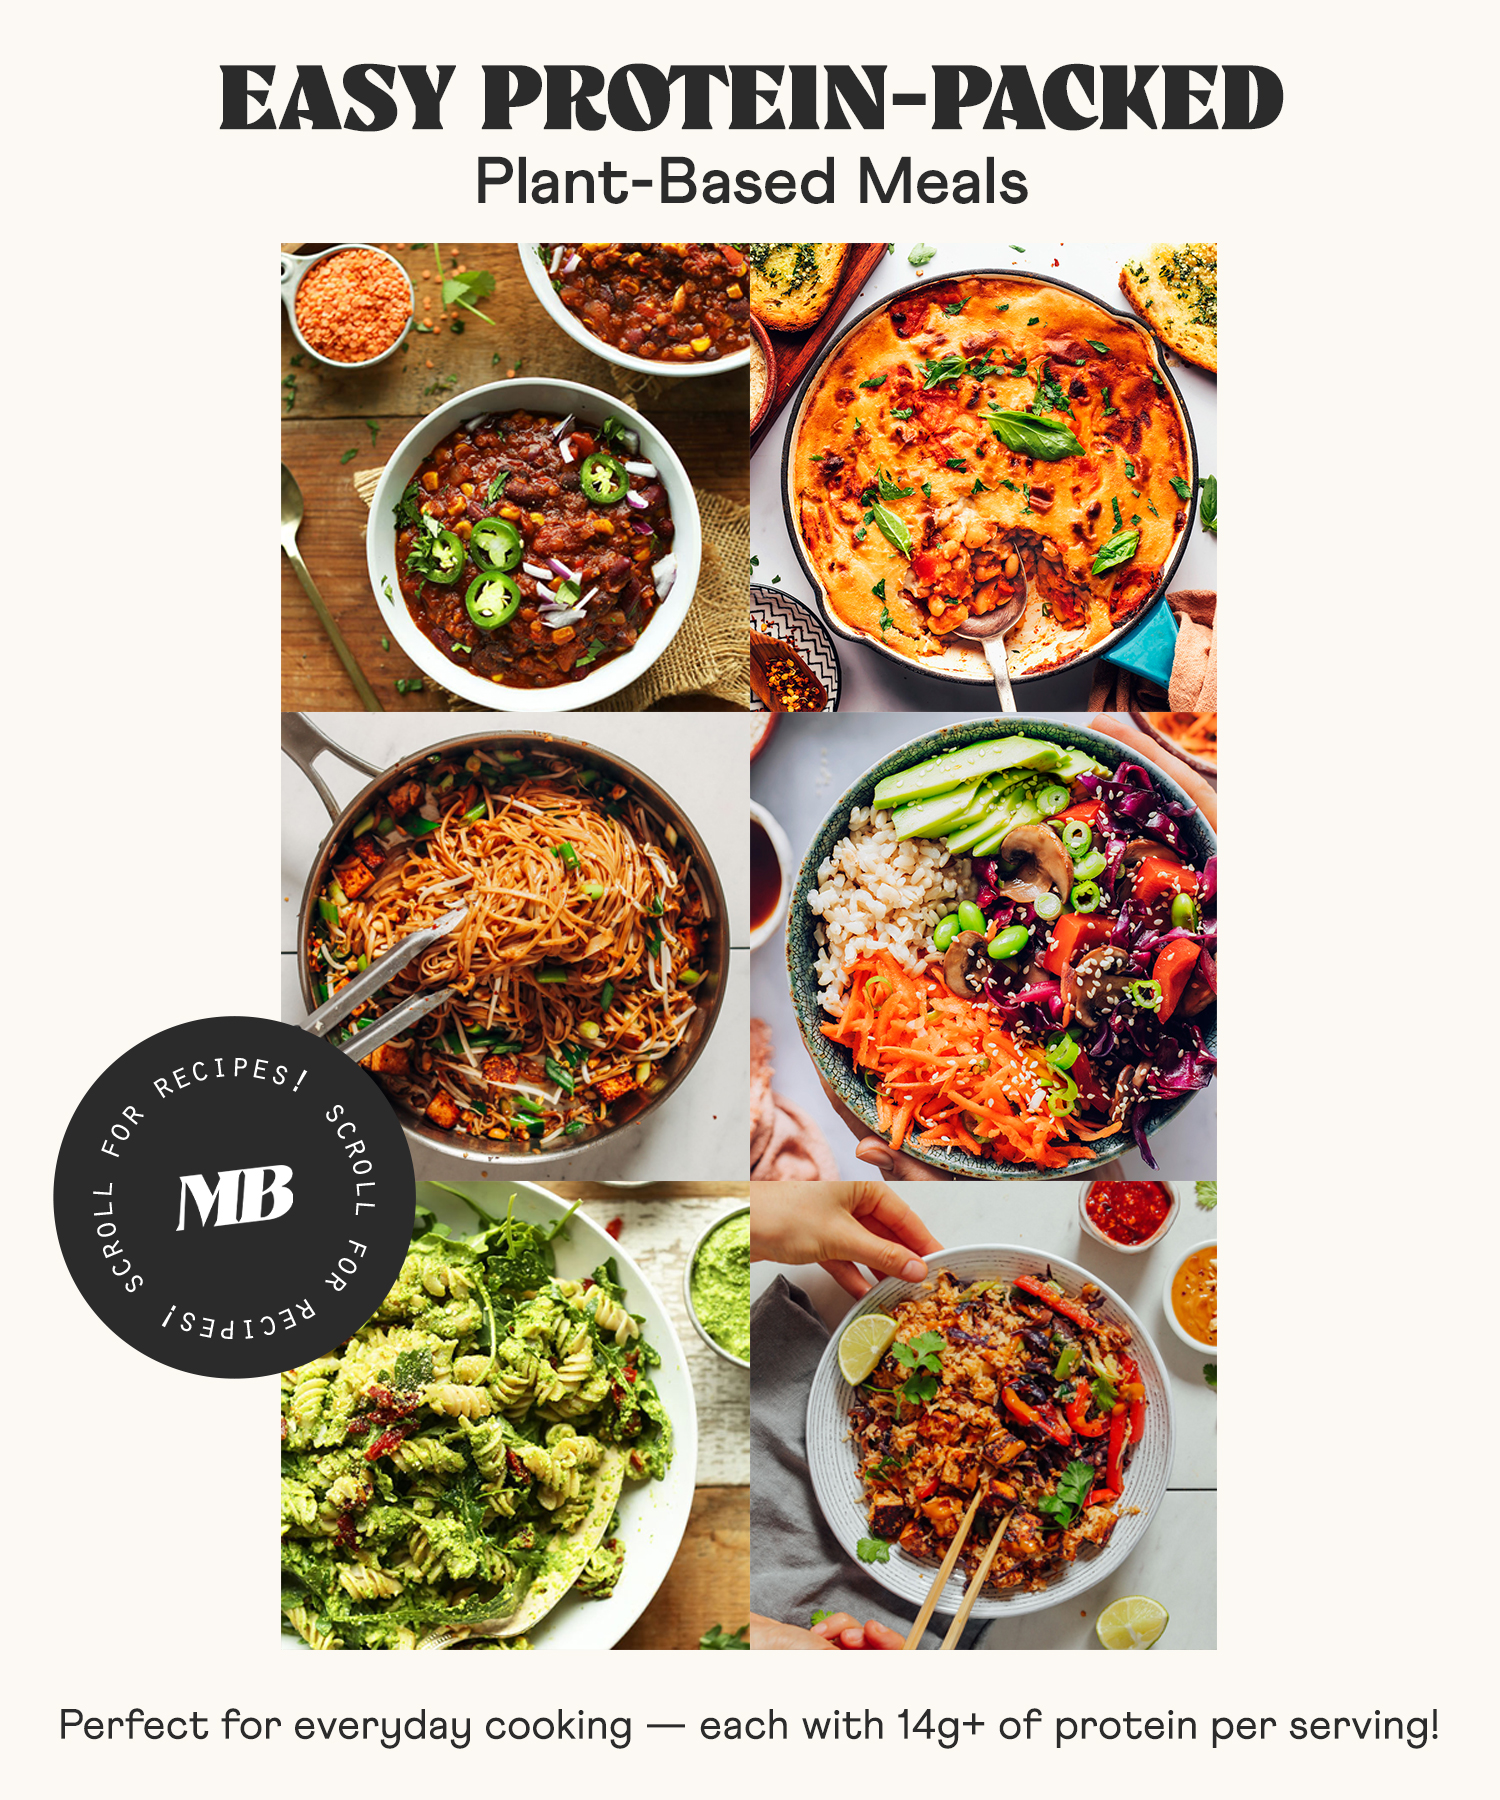 Image of protein-packed plant-based meals